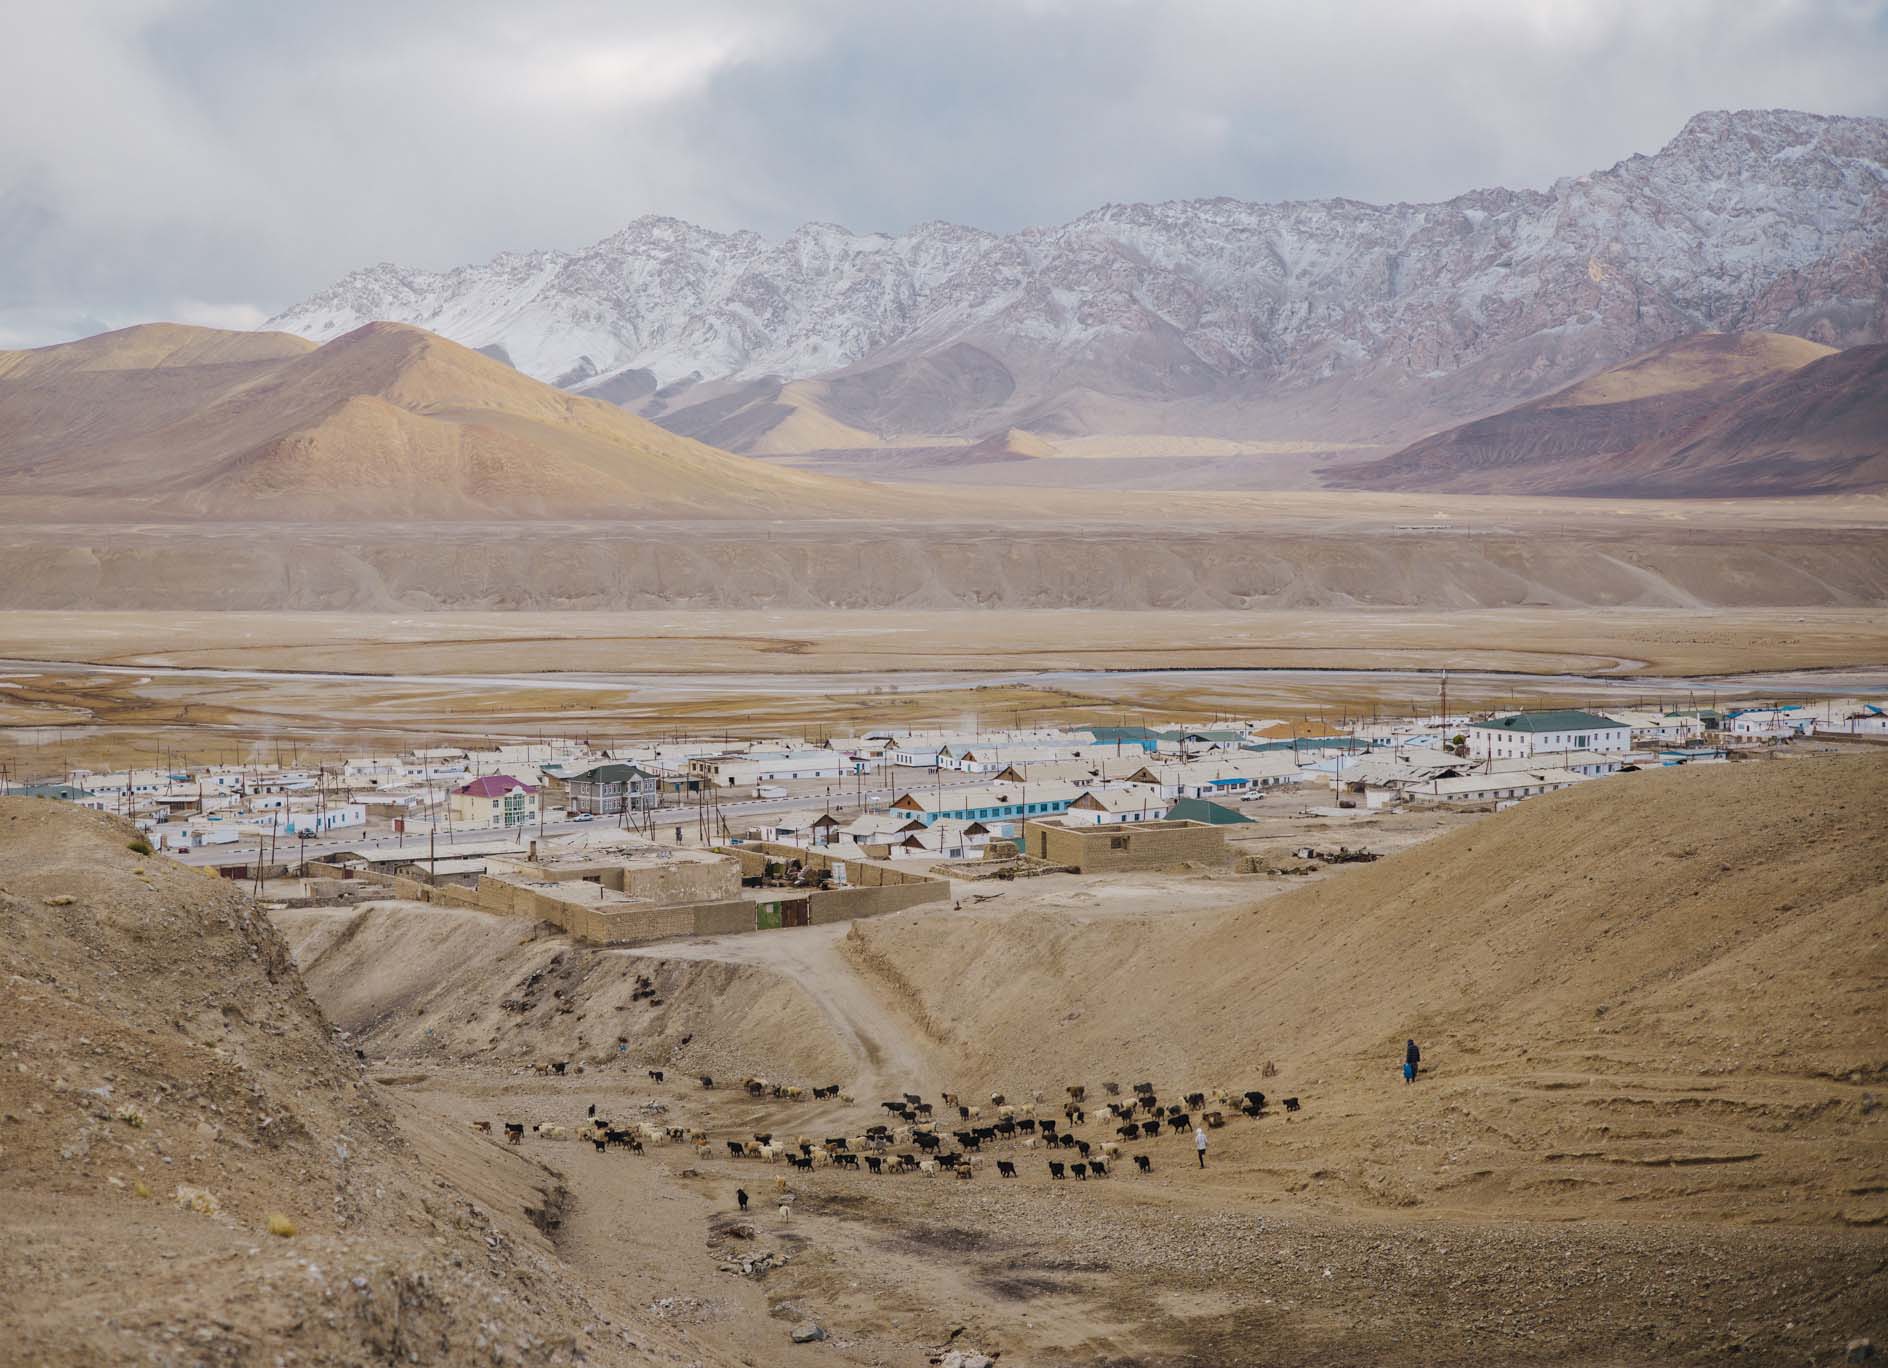 High up in Tajikistan’s Pamir mountains, life brings gruelling challenges